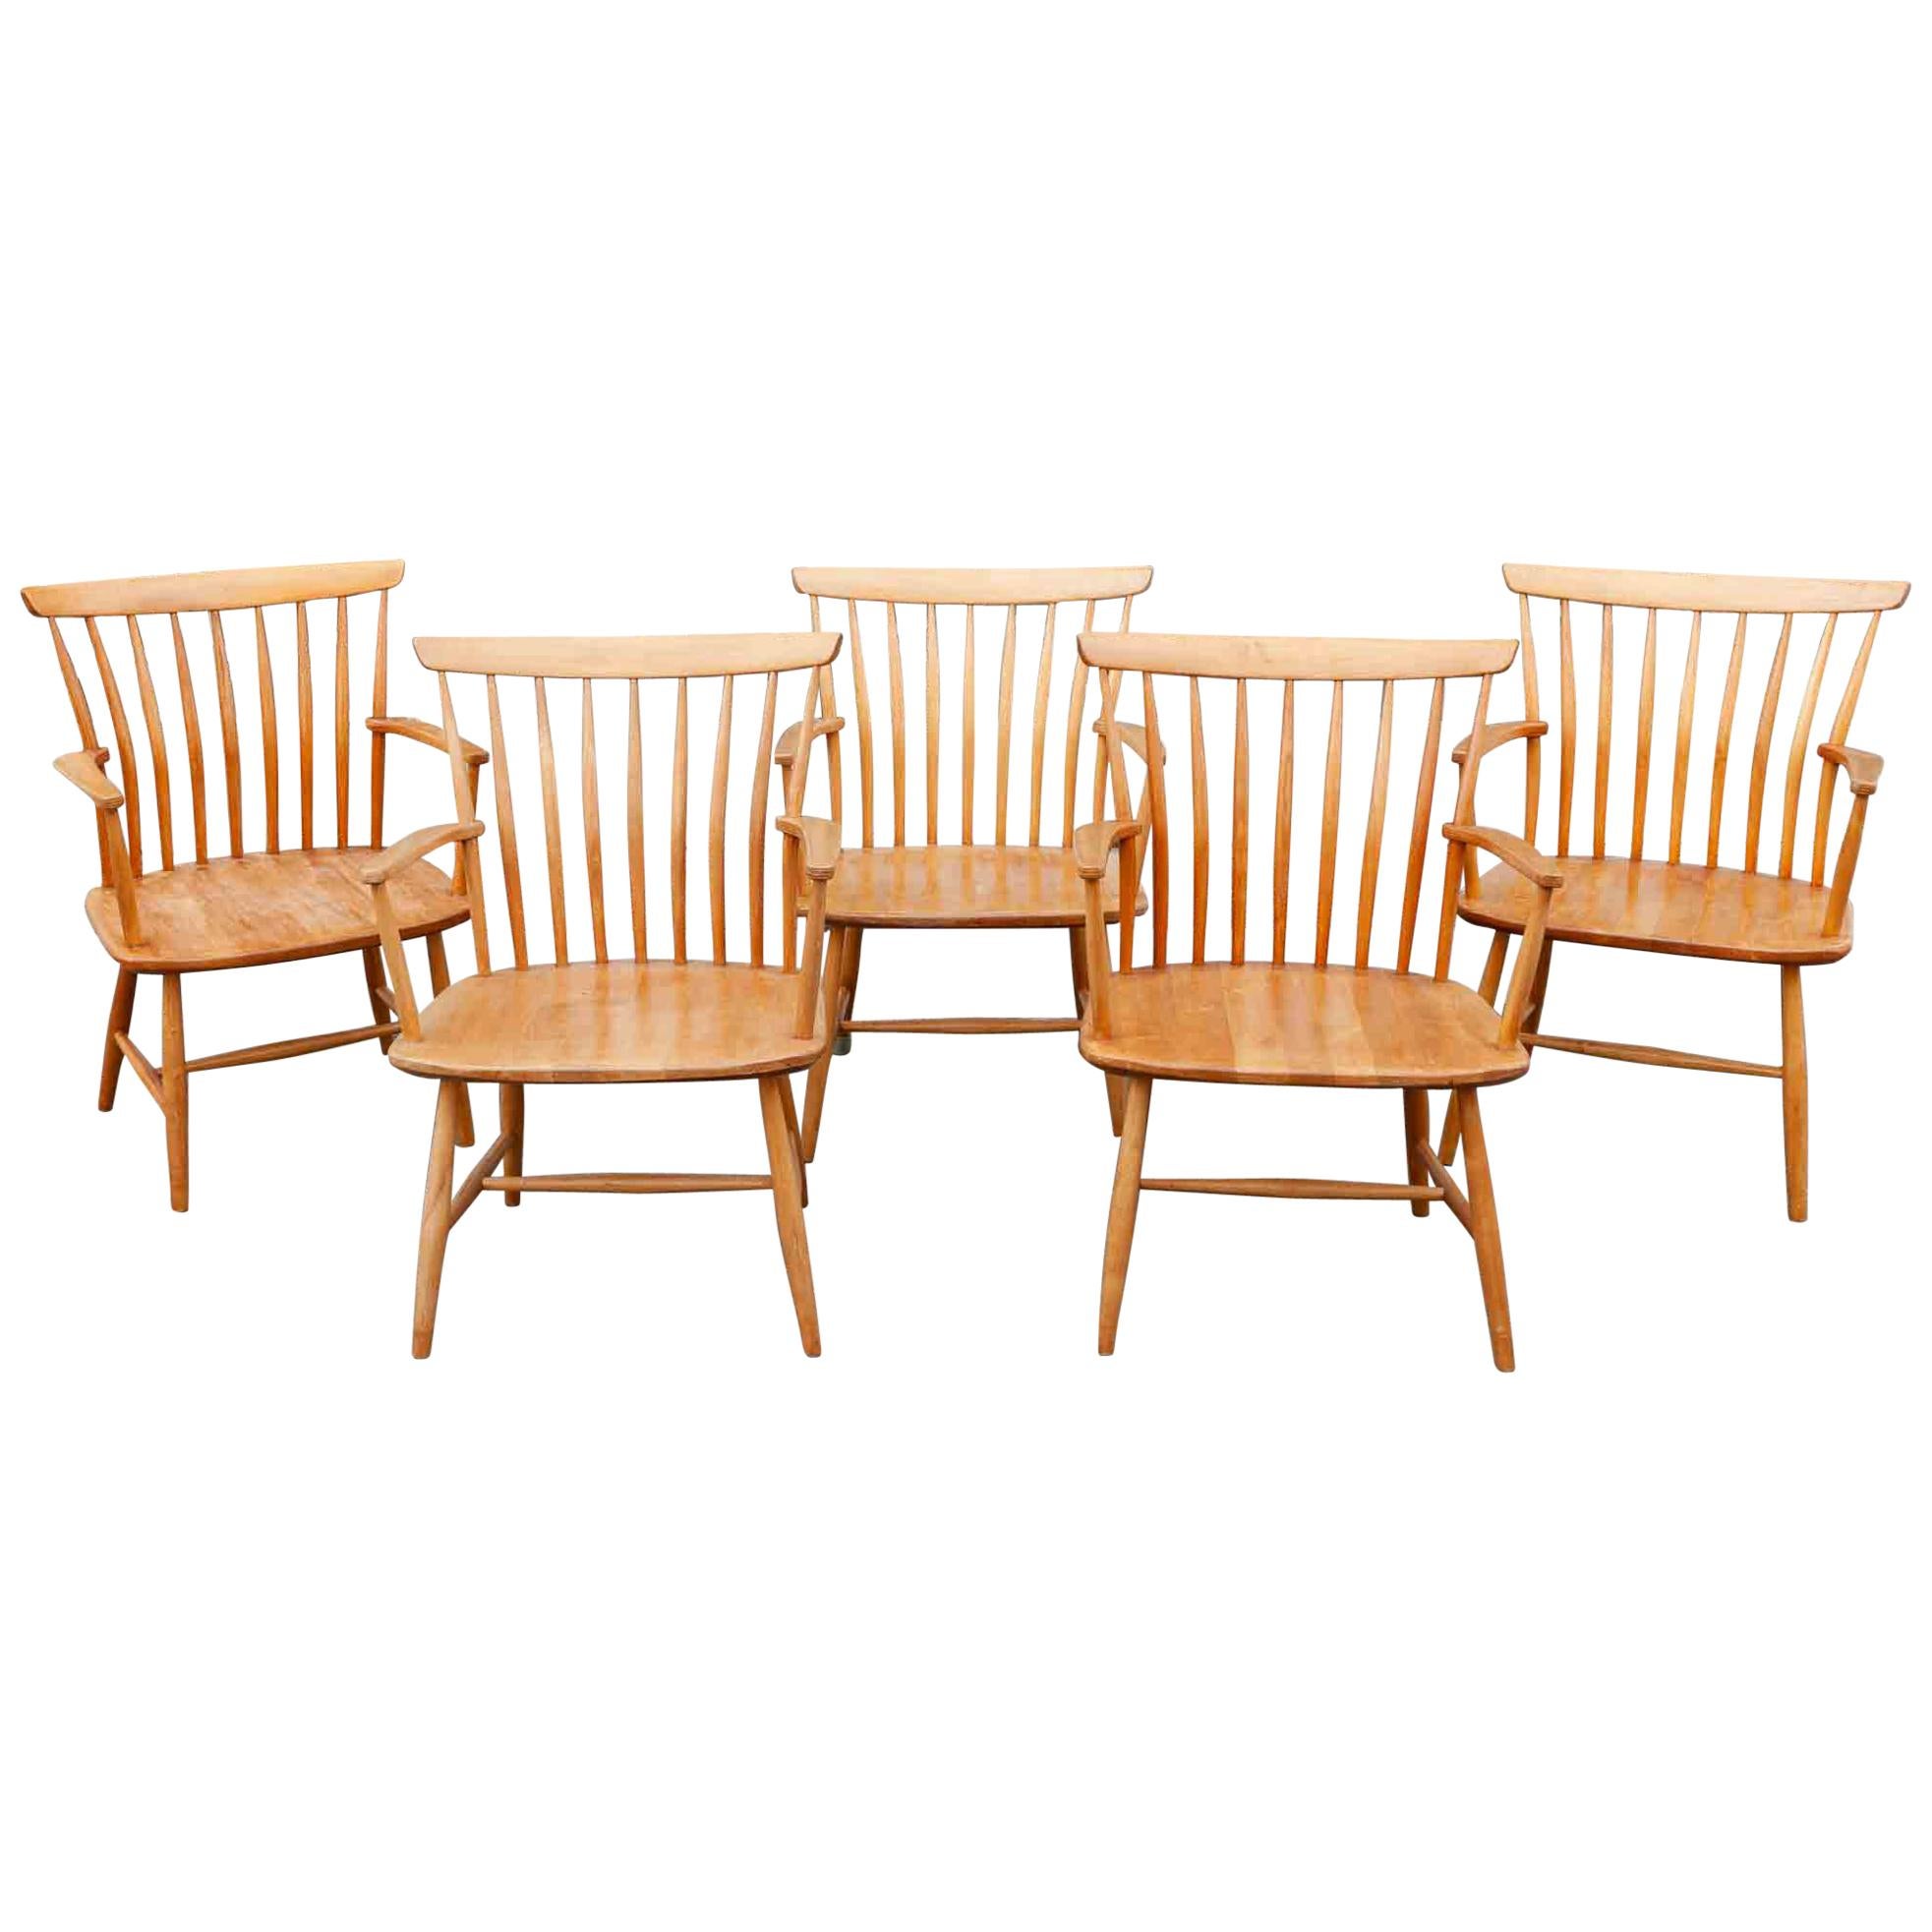 Five 1950s Swedish Bentwood Beech Armchairs by Bengt Akerblom for Akerblom